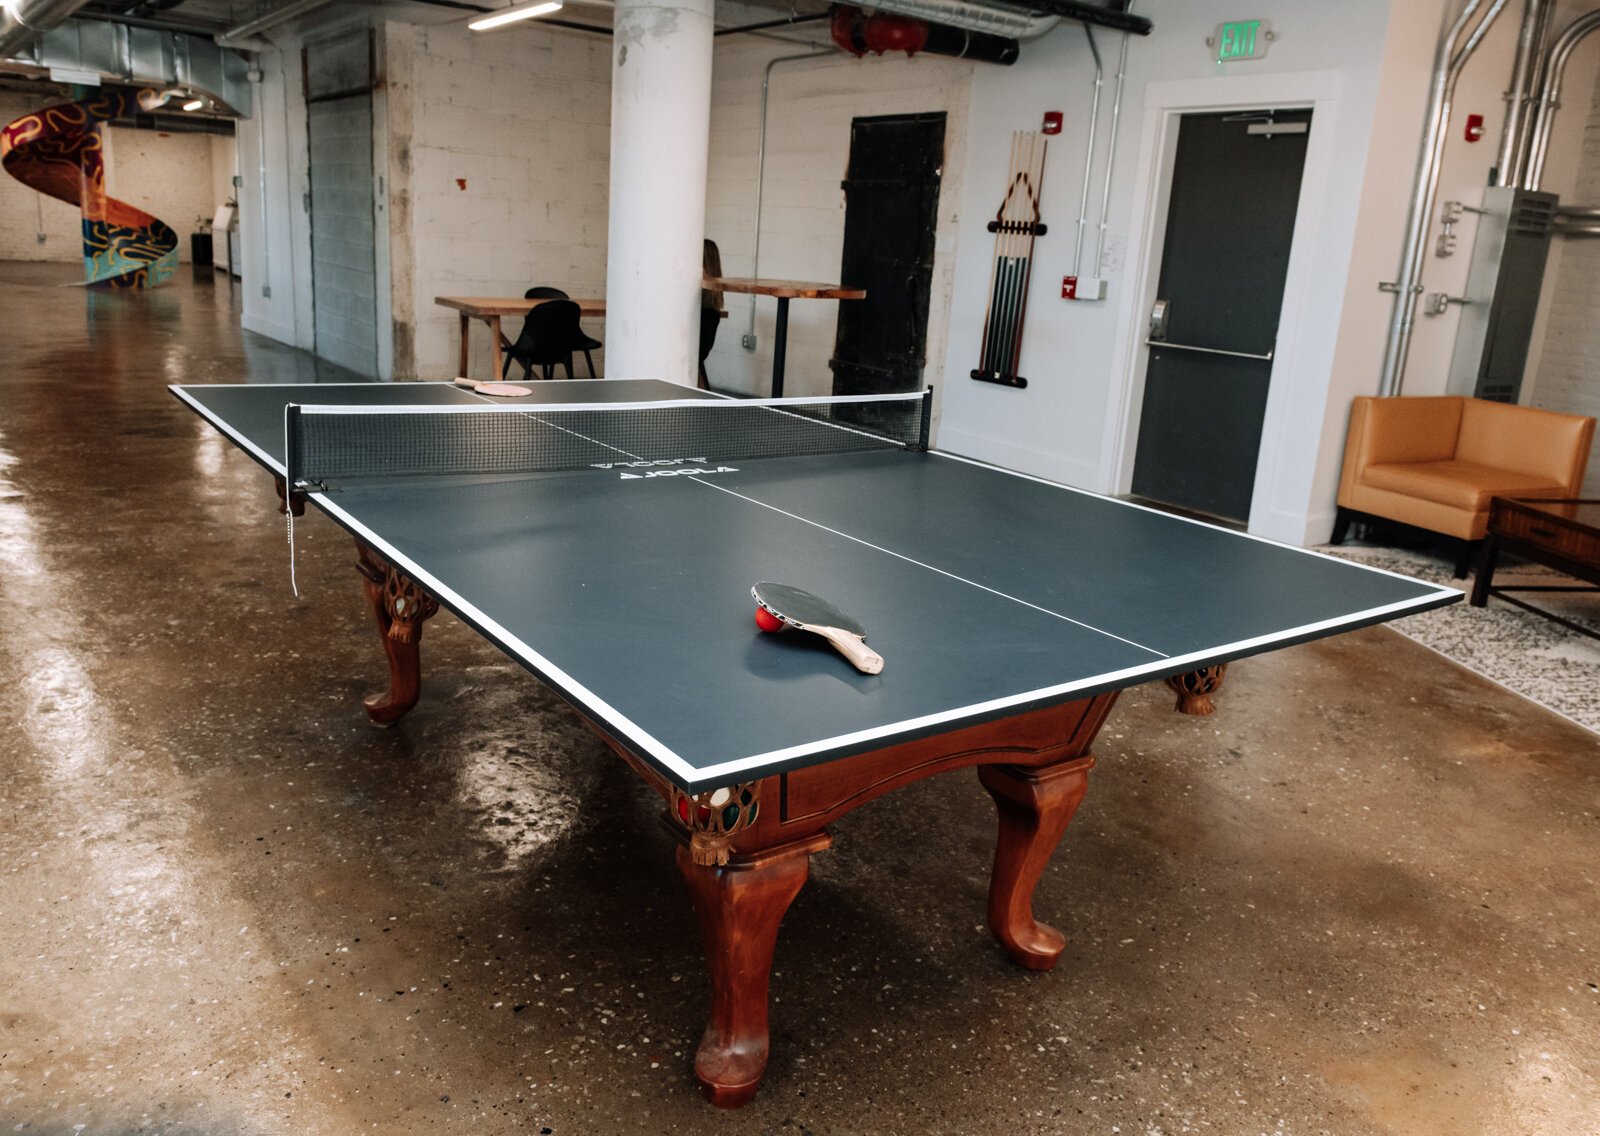 The communal pool table at Paper Mill Workspace on the 4th floor above Utopian Coffee.